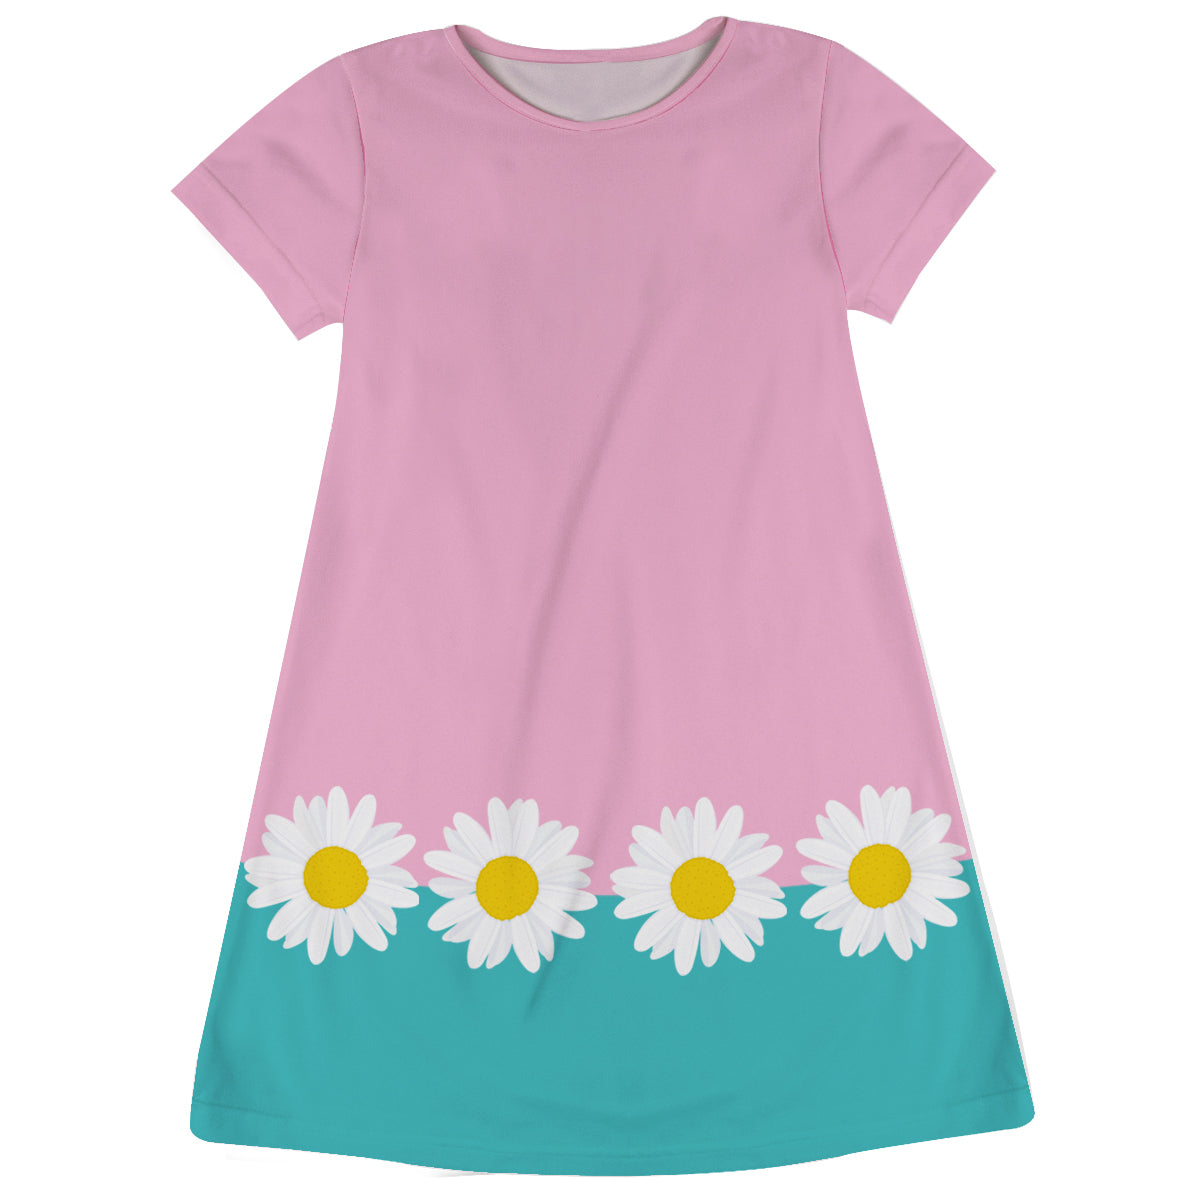 Daisy Monogram Turquoise and Pink Short Sleeve A Line Dress - Wimziy&Co.